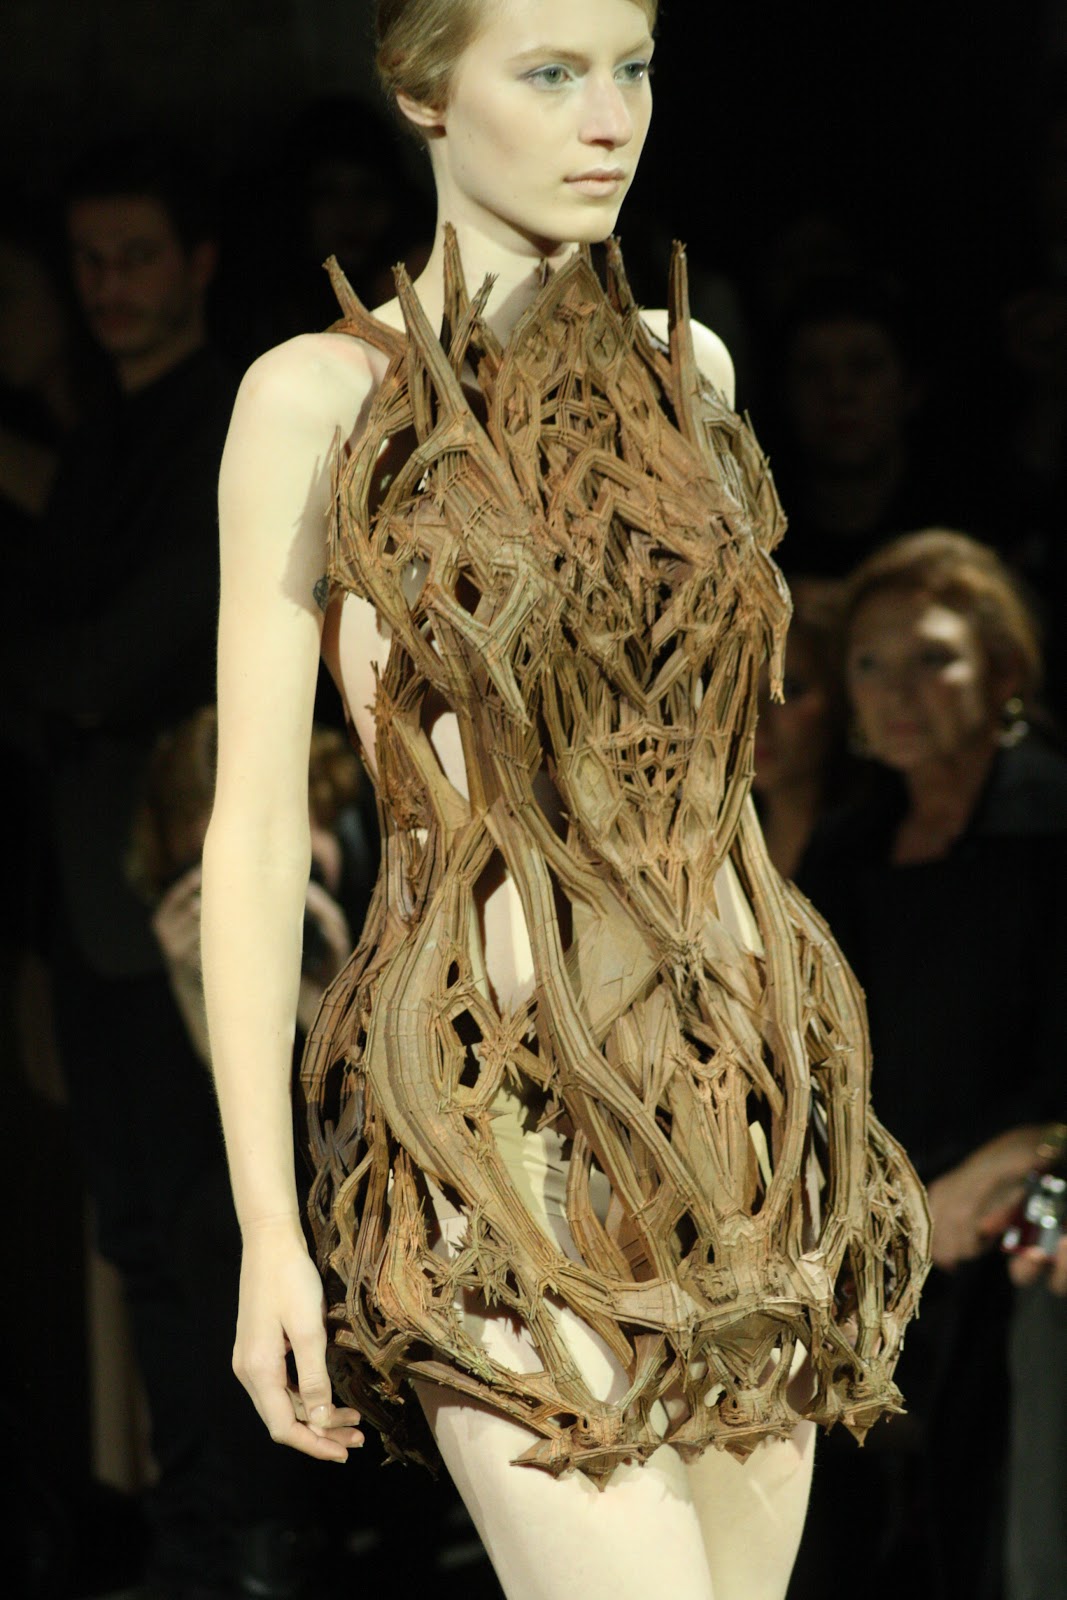 Iris Van Herpen - “Cathedral Dress” from Micro S/S 2012 | Futuristic ...